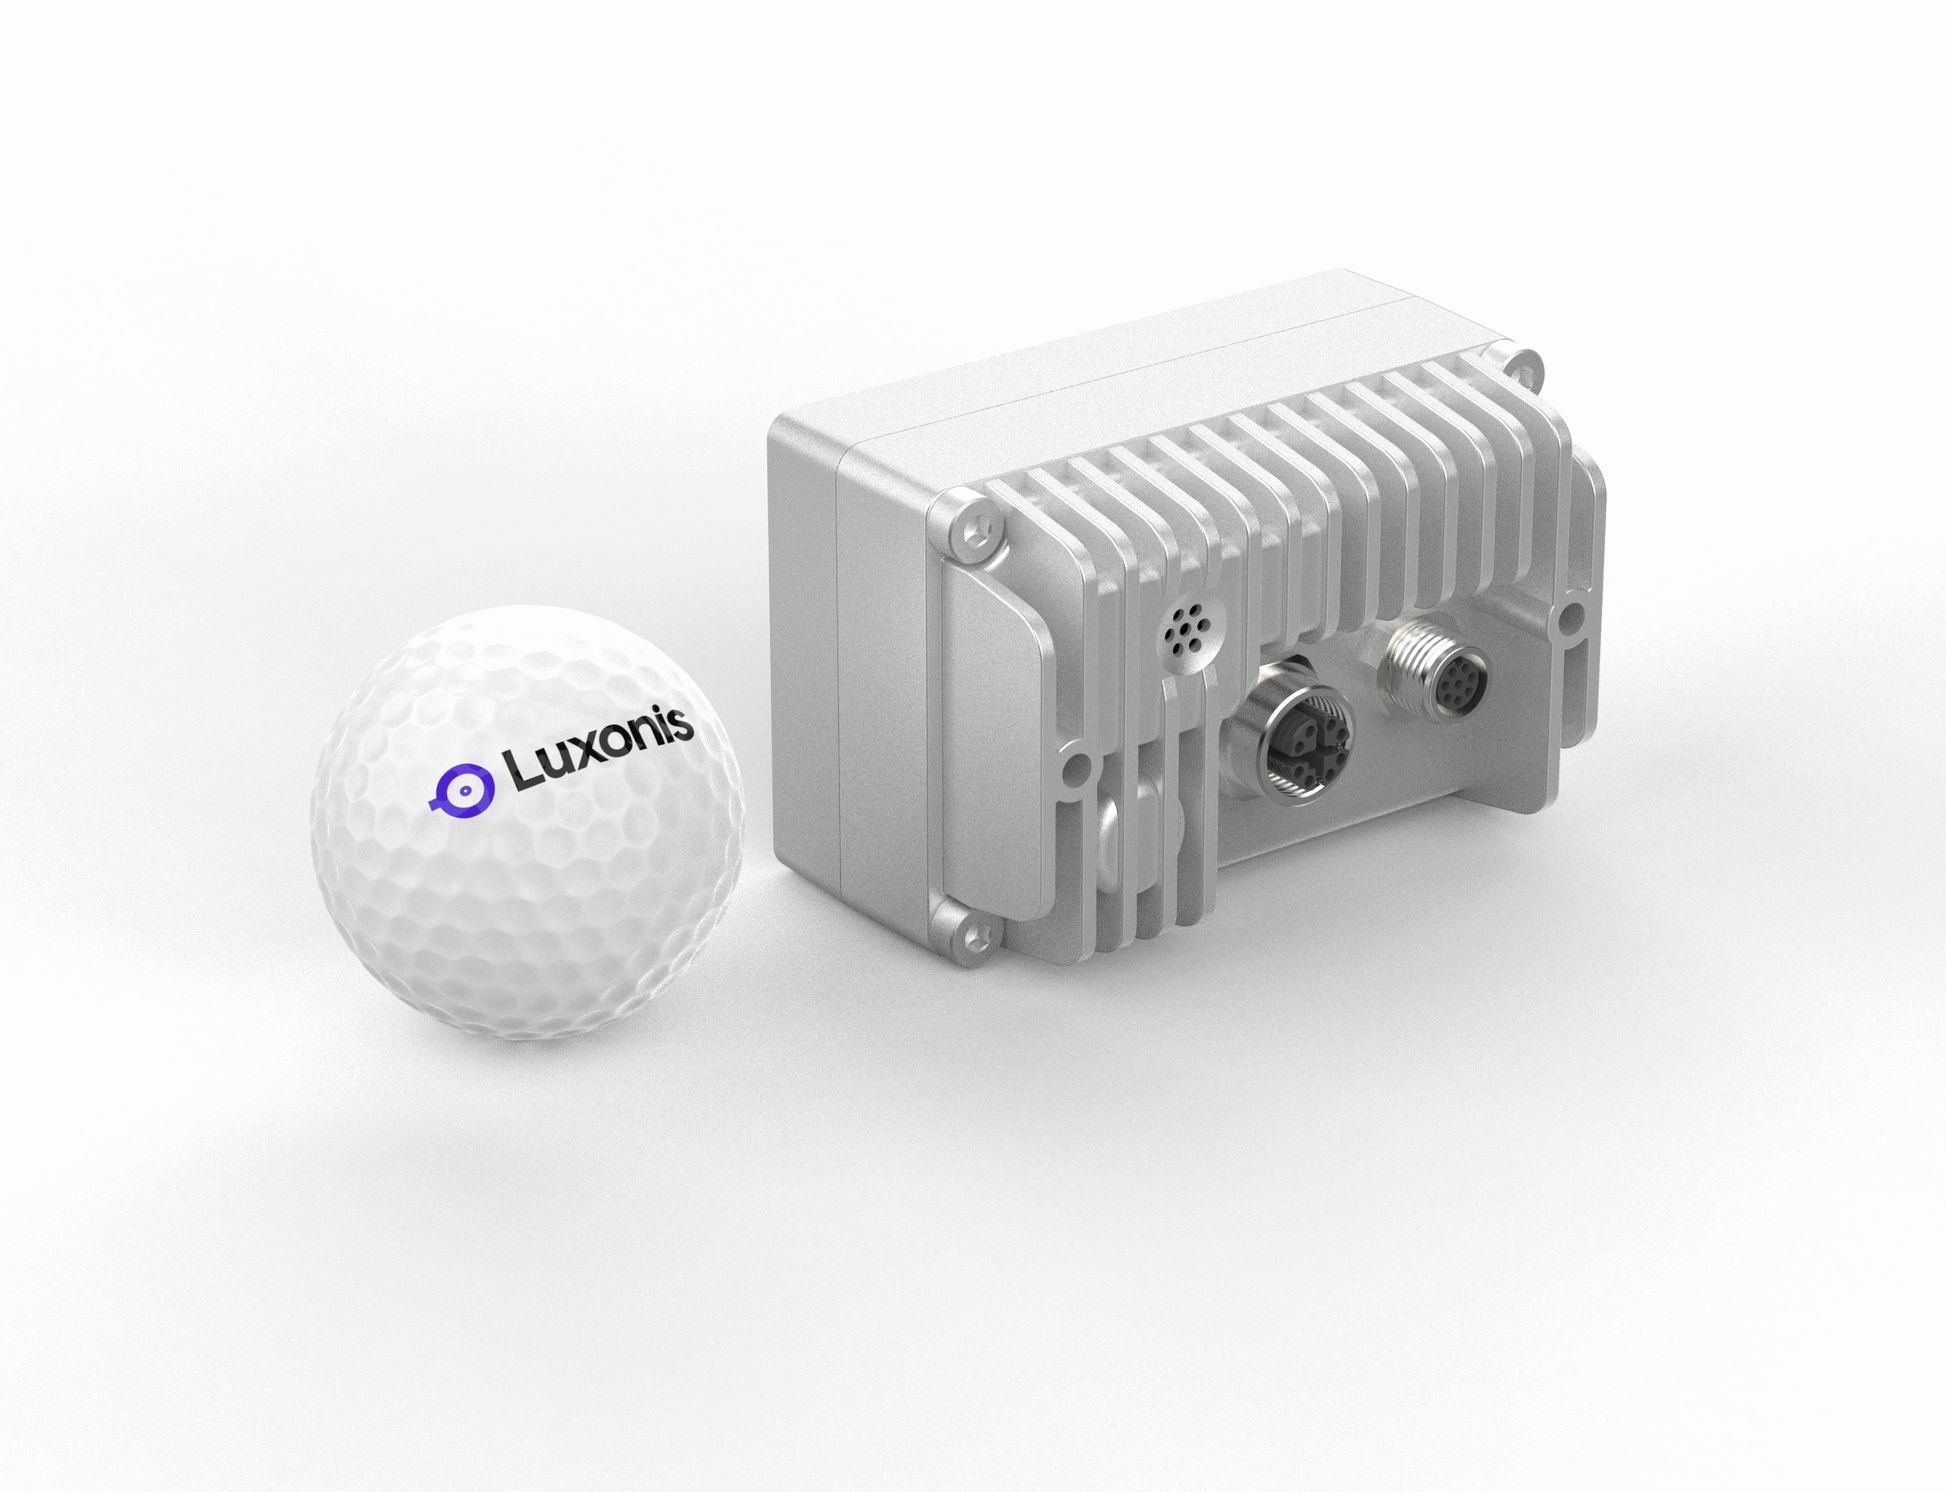 Size comparison of the OAK-D SR PoE next to a Luxonis golf ball